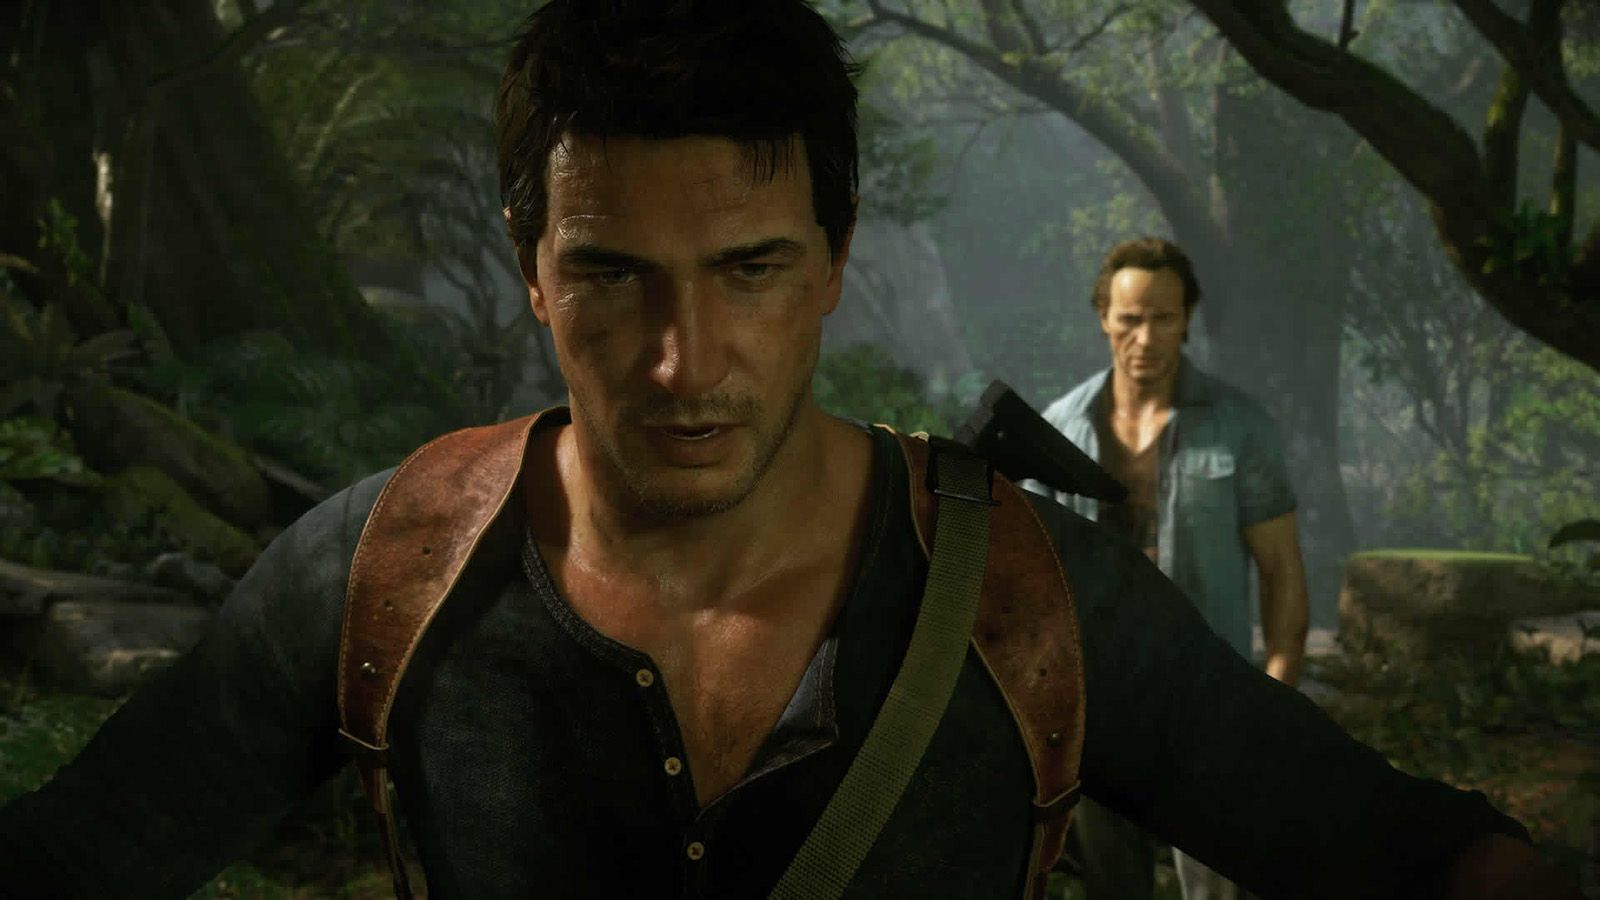 uncharted 4 delayed until spring 2016 microsoft dancing in the streets with tomb raider exclusive image 1